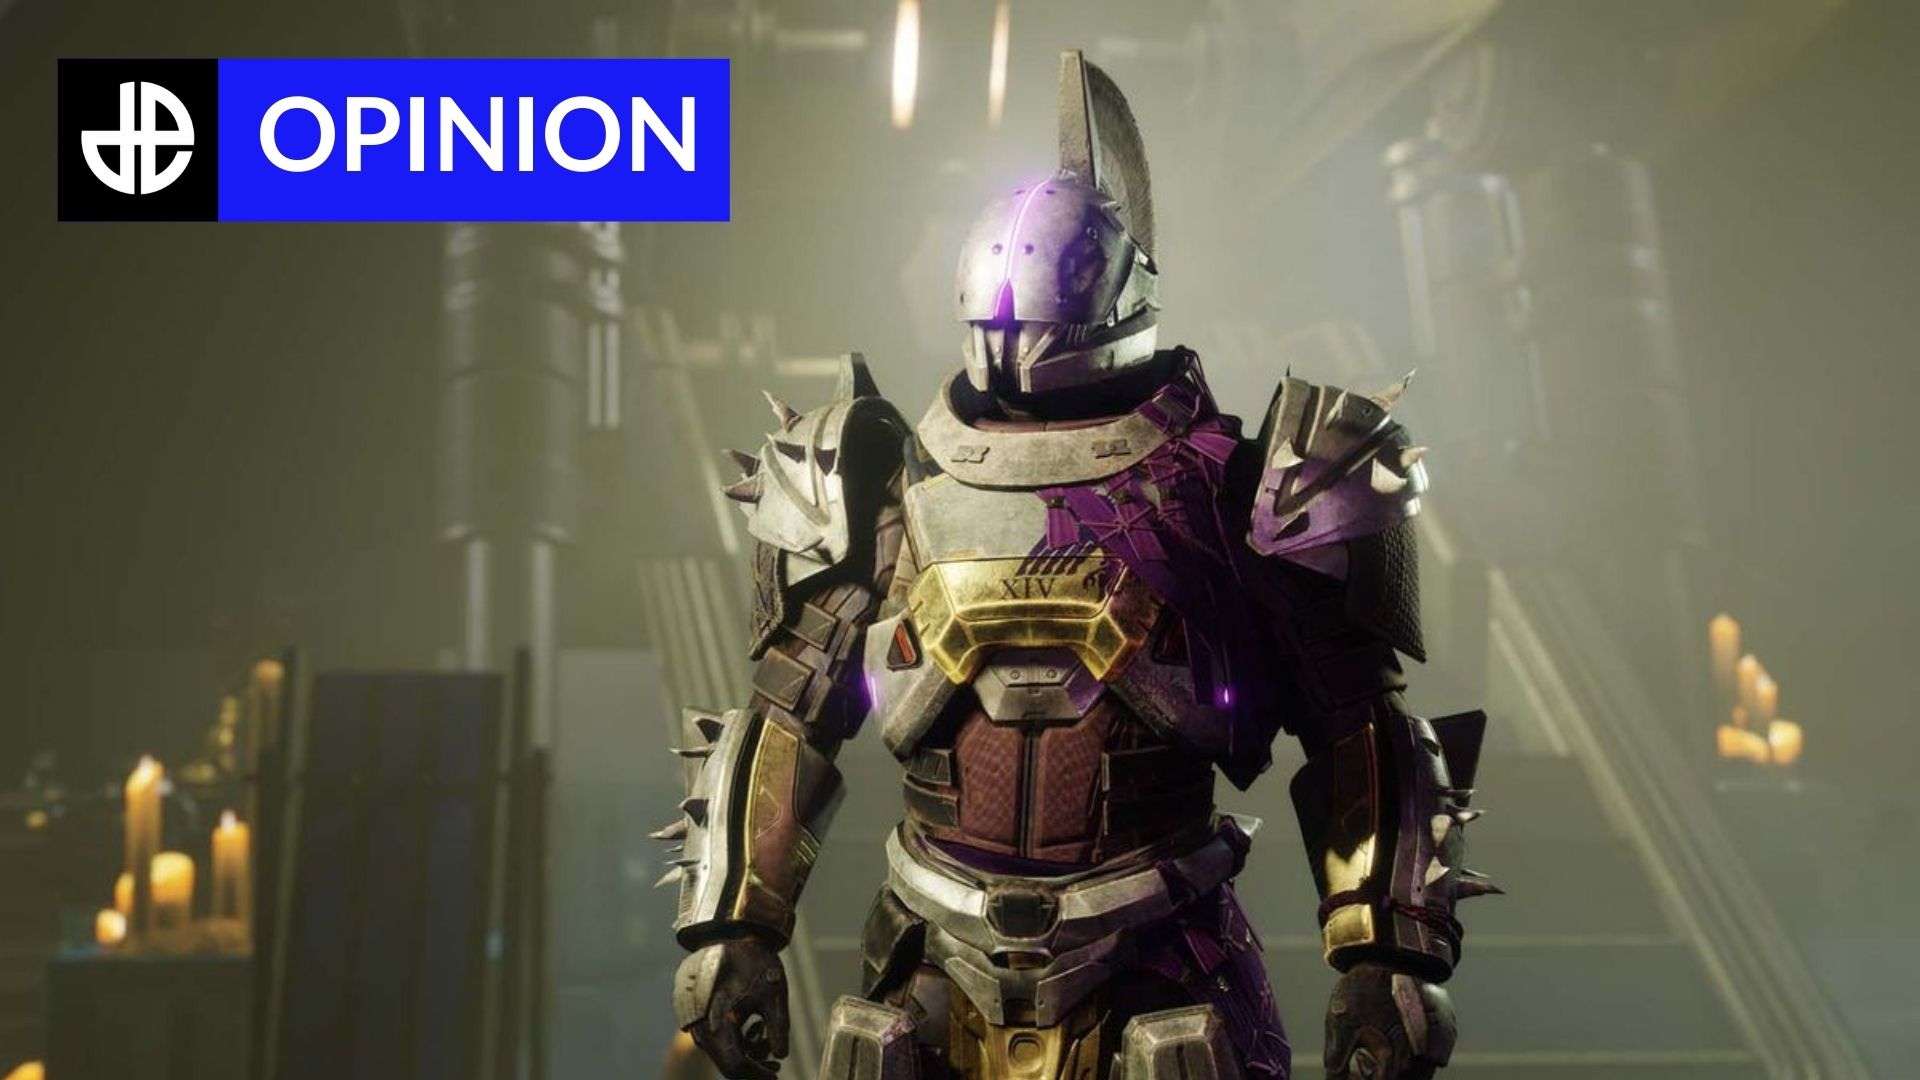 Destiny 2 Saint-14 character in the Tower